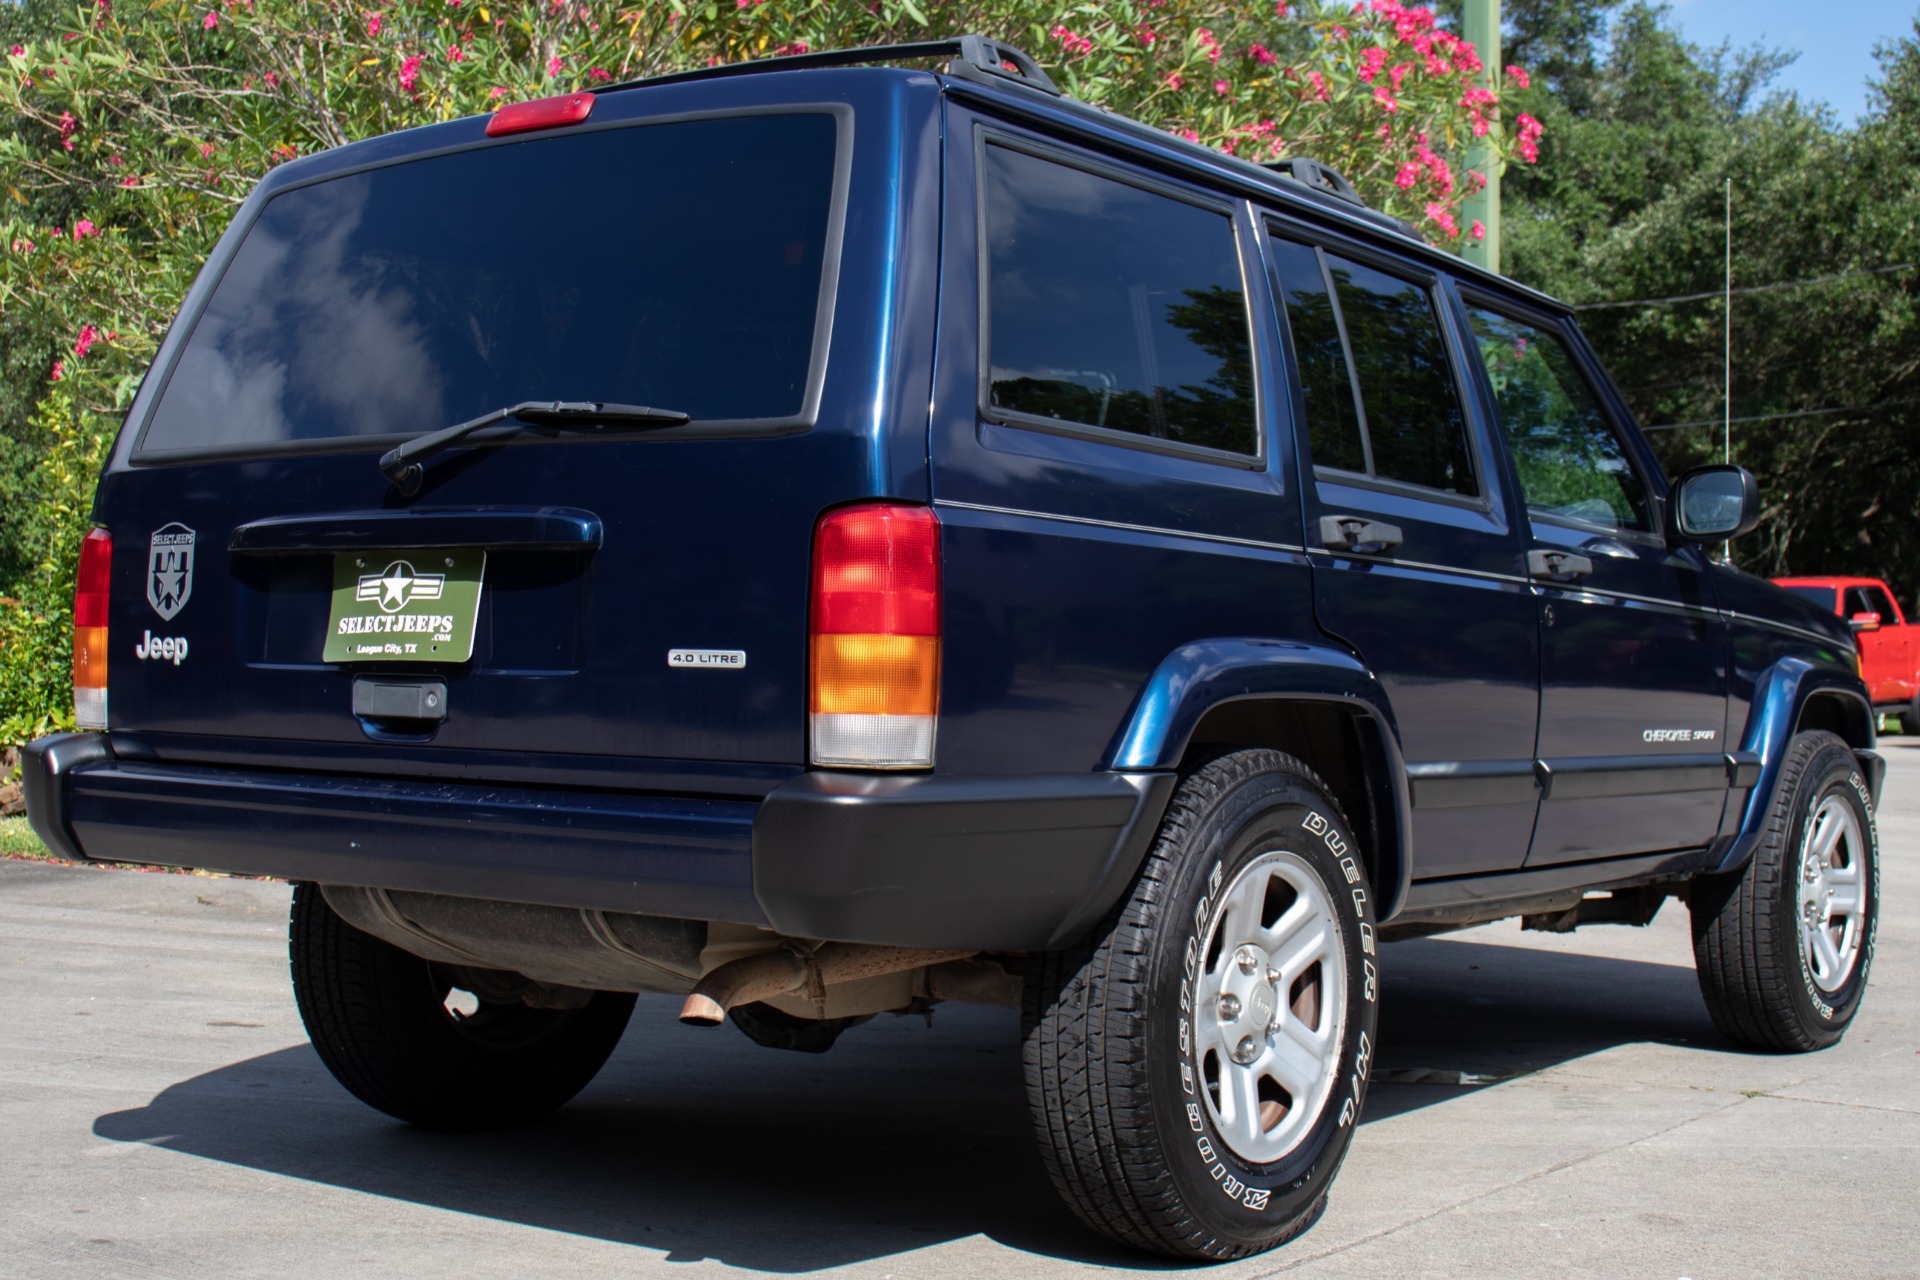 Used 01 Jeep Cherokee Sport For Sale 6 995 Select Jeeps Inc Stock